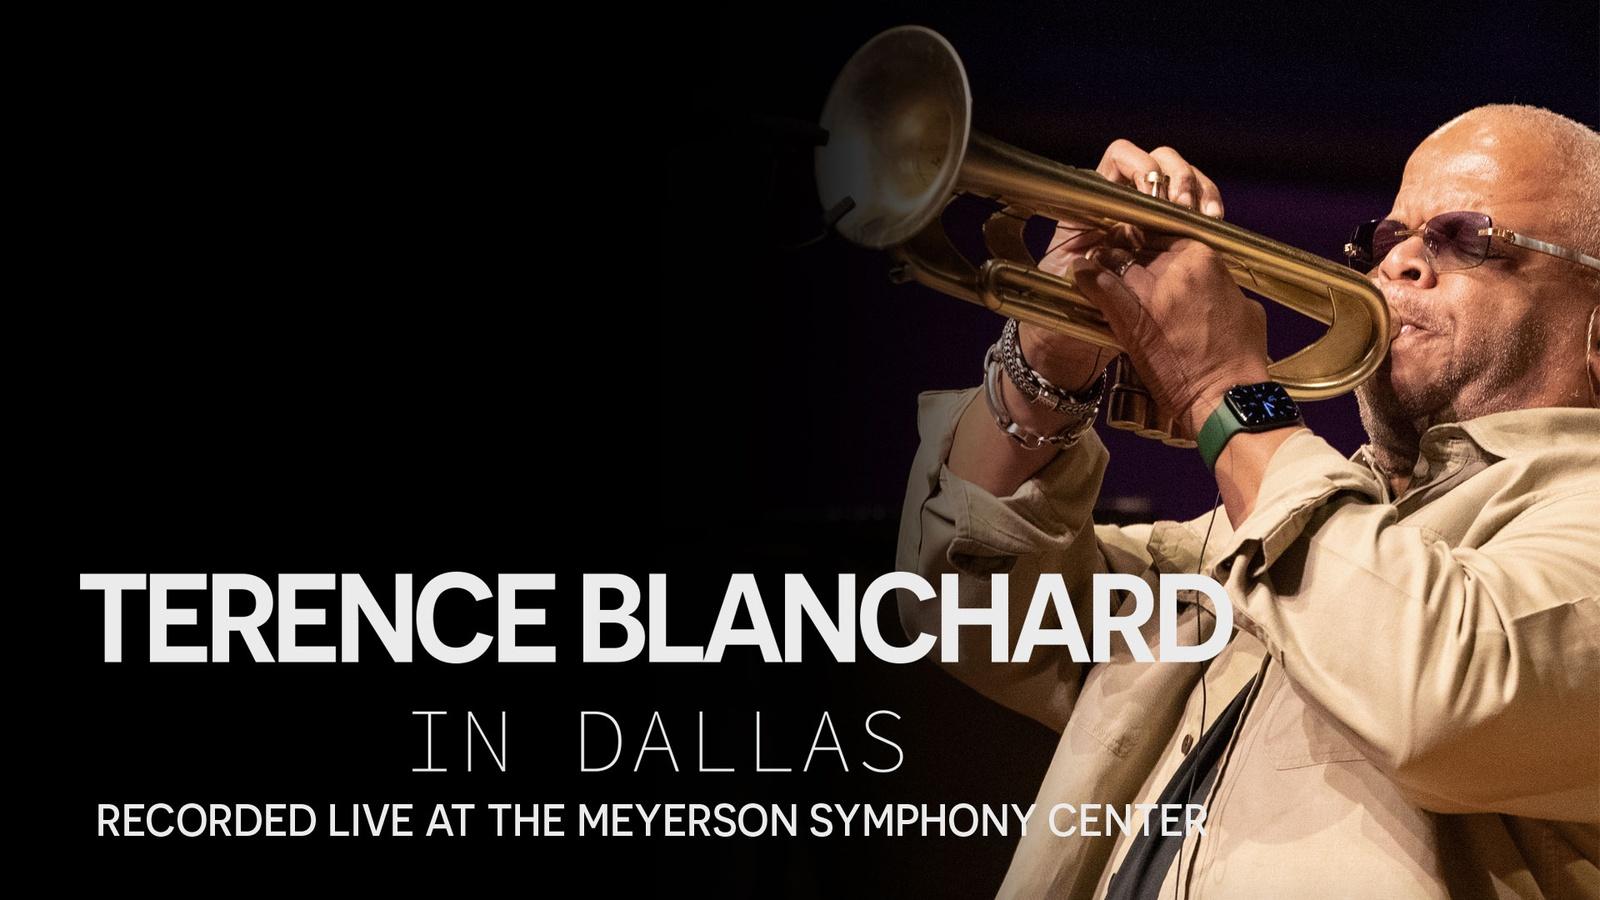 Terence Blanchard in Dallas